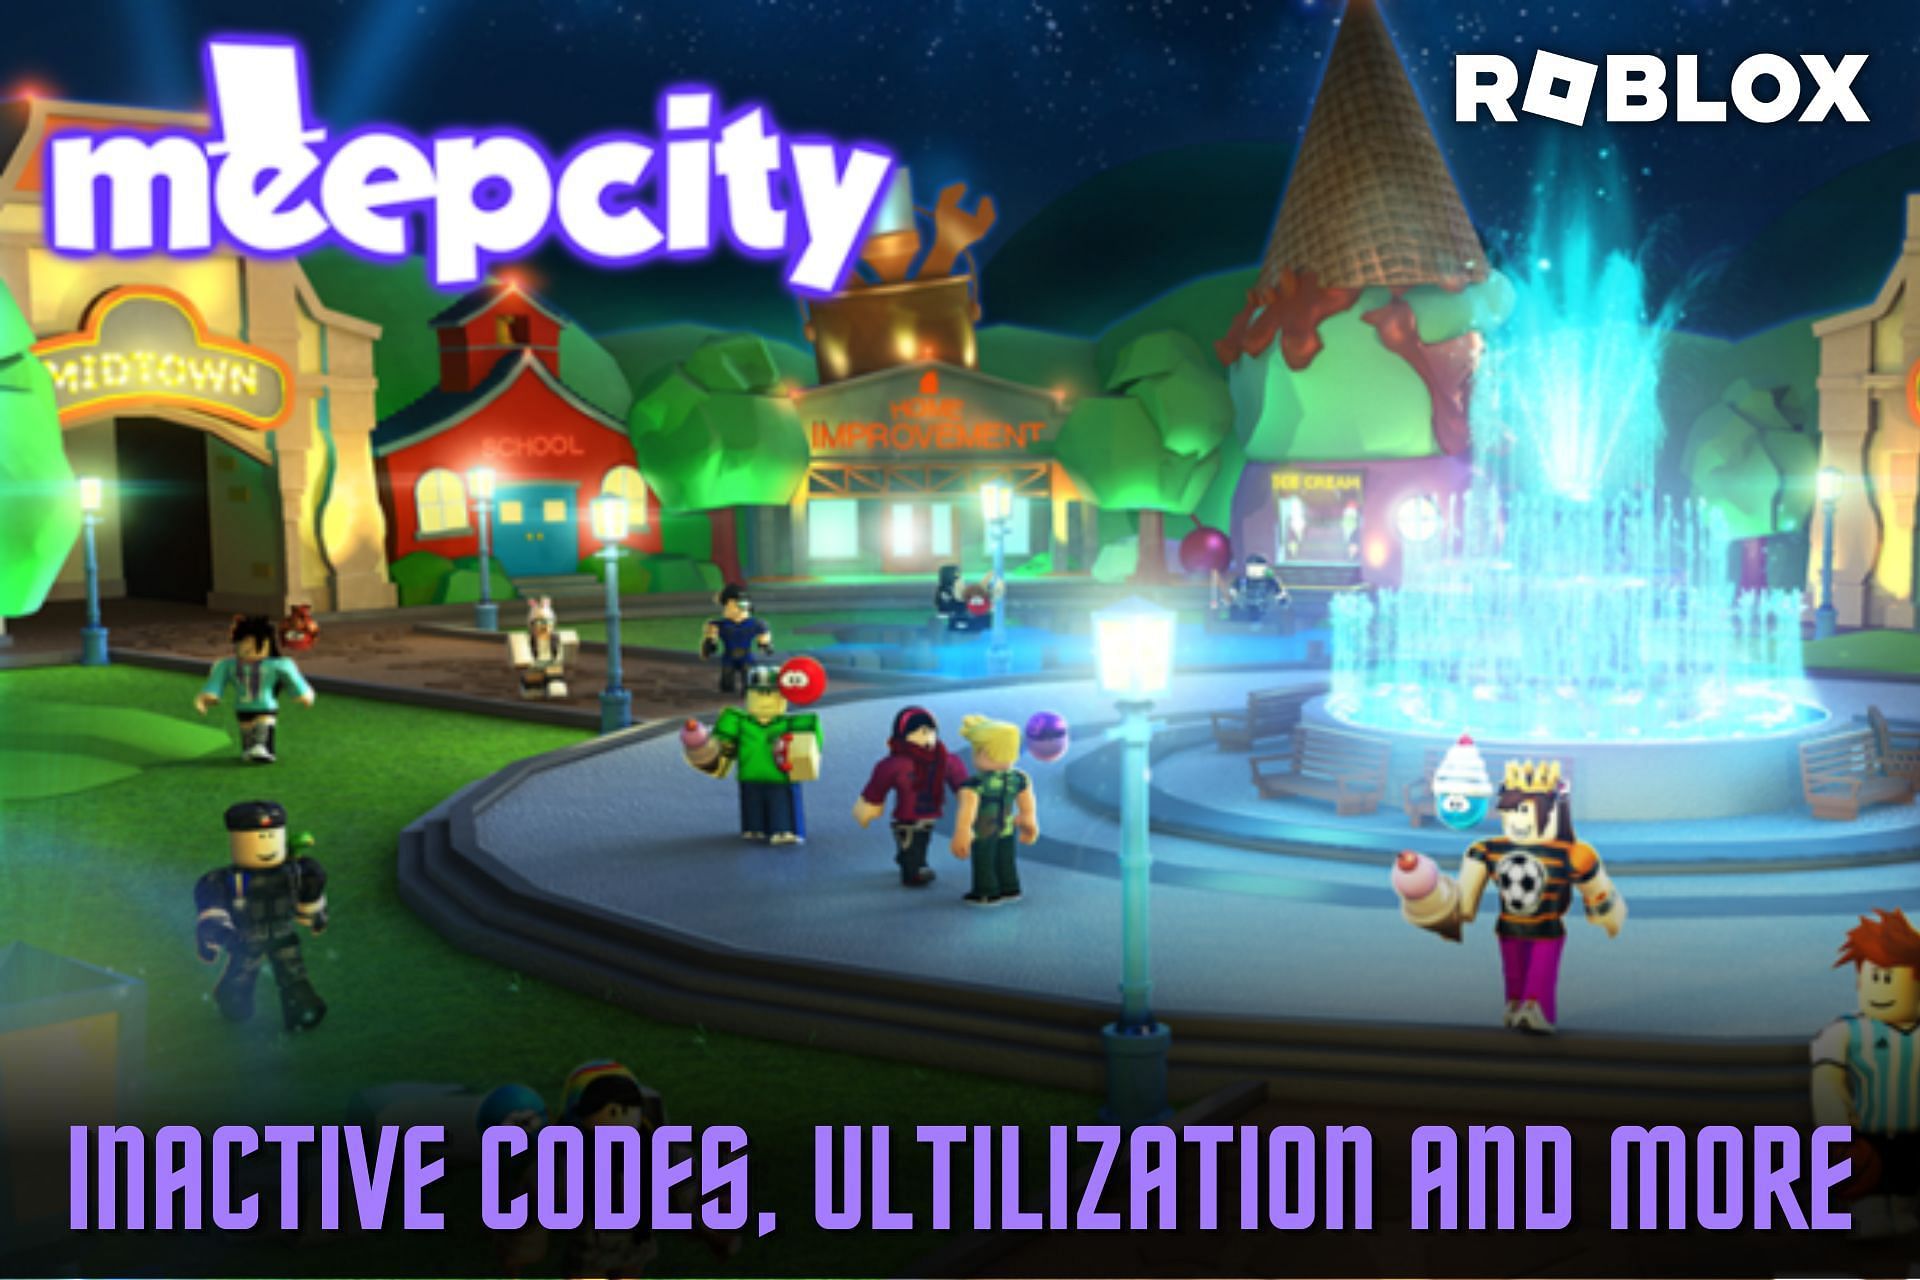 Website of the Roblox Game MeepCity. Editorial Stock Photo - Image